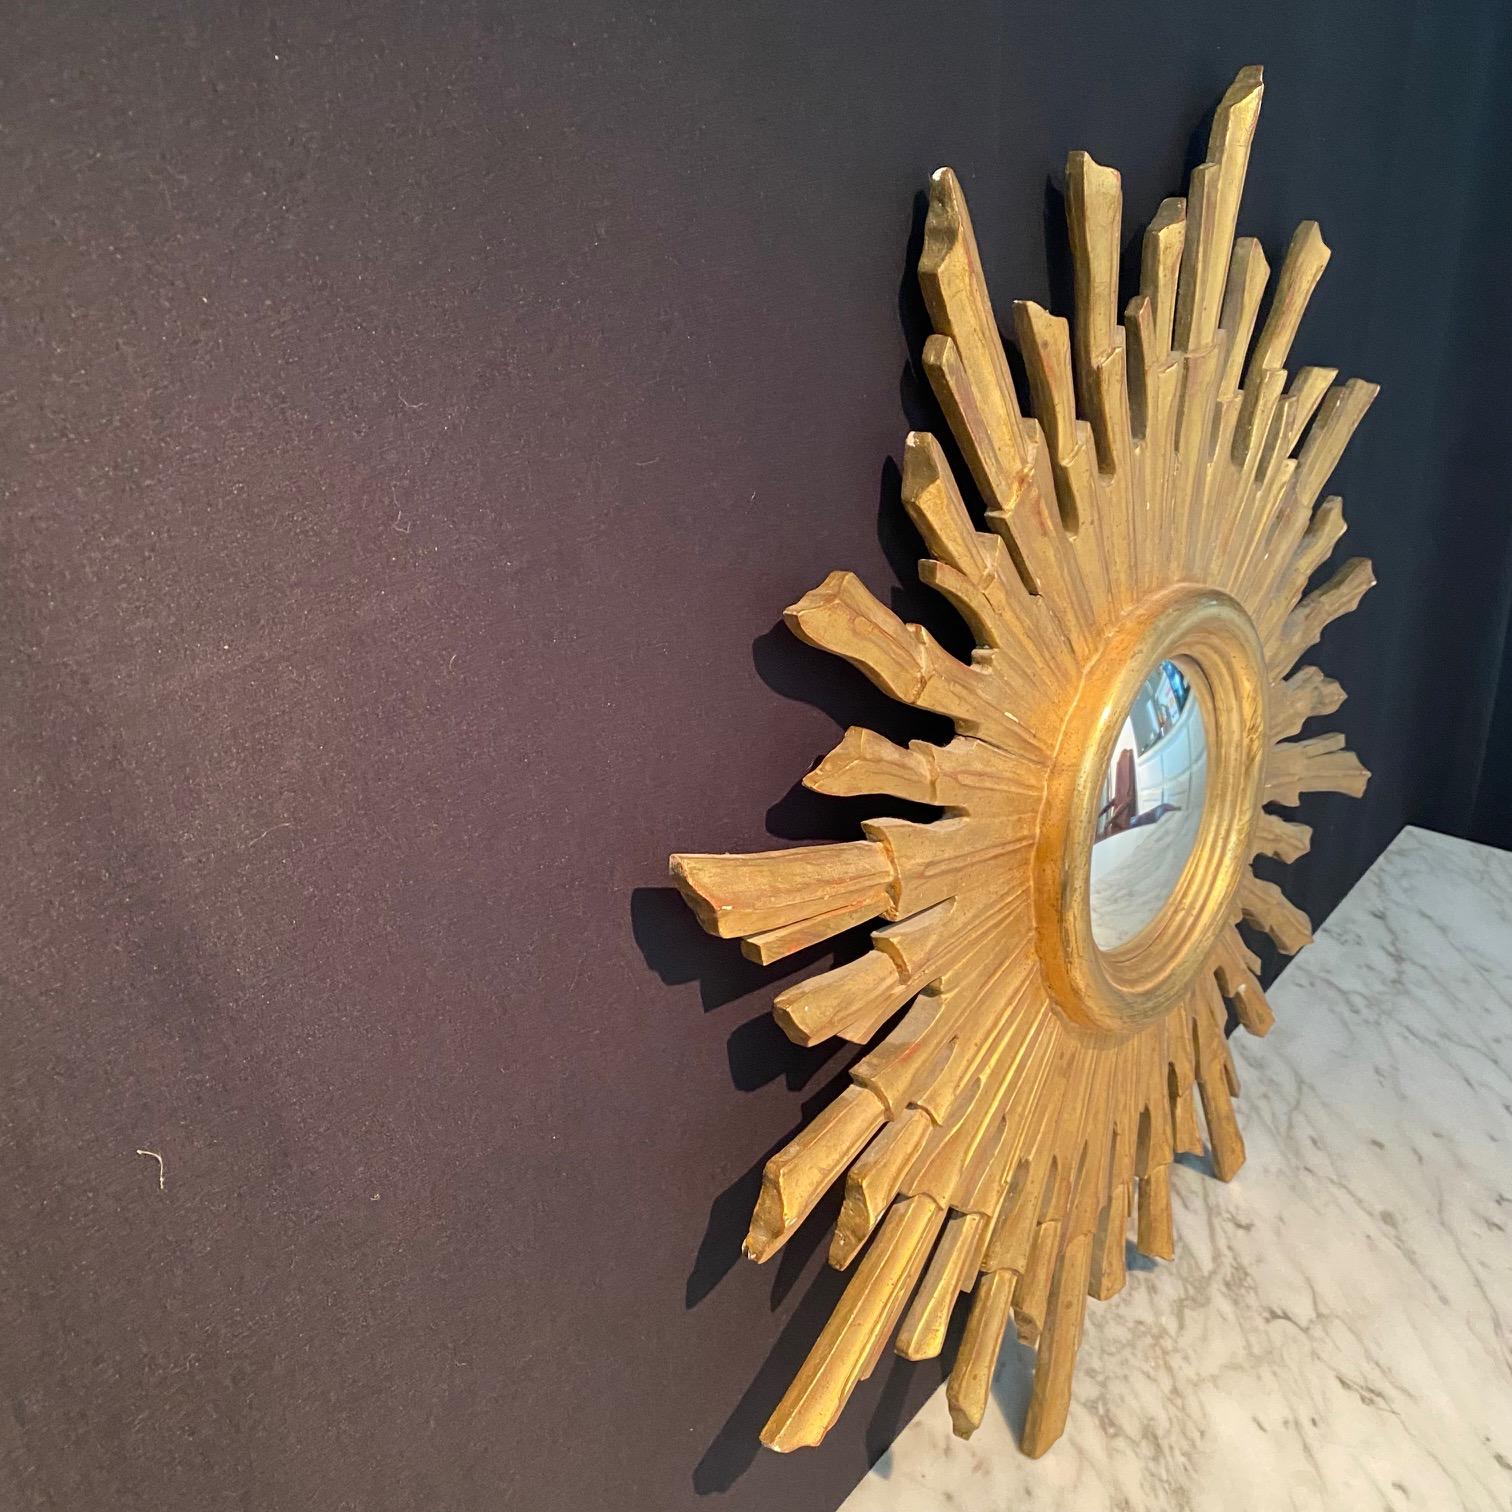 A very beautiful and decorative large golden soleil sunburst starburst giltwood convex mirror. Made and bought in France. Handmade of carved stunningly gilt-gold plated wood, in great condition. One of the best we have seen.
mirror itself is 5.75